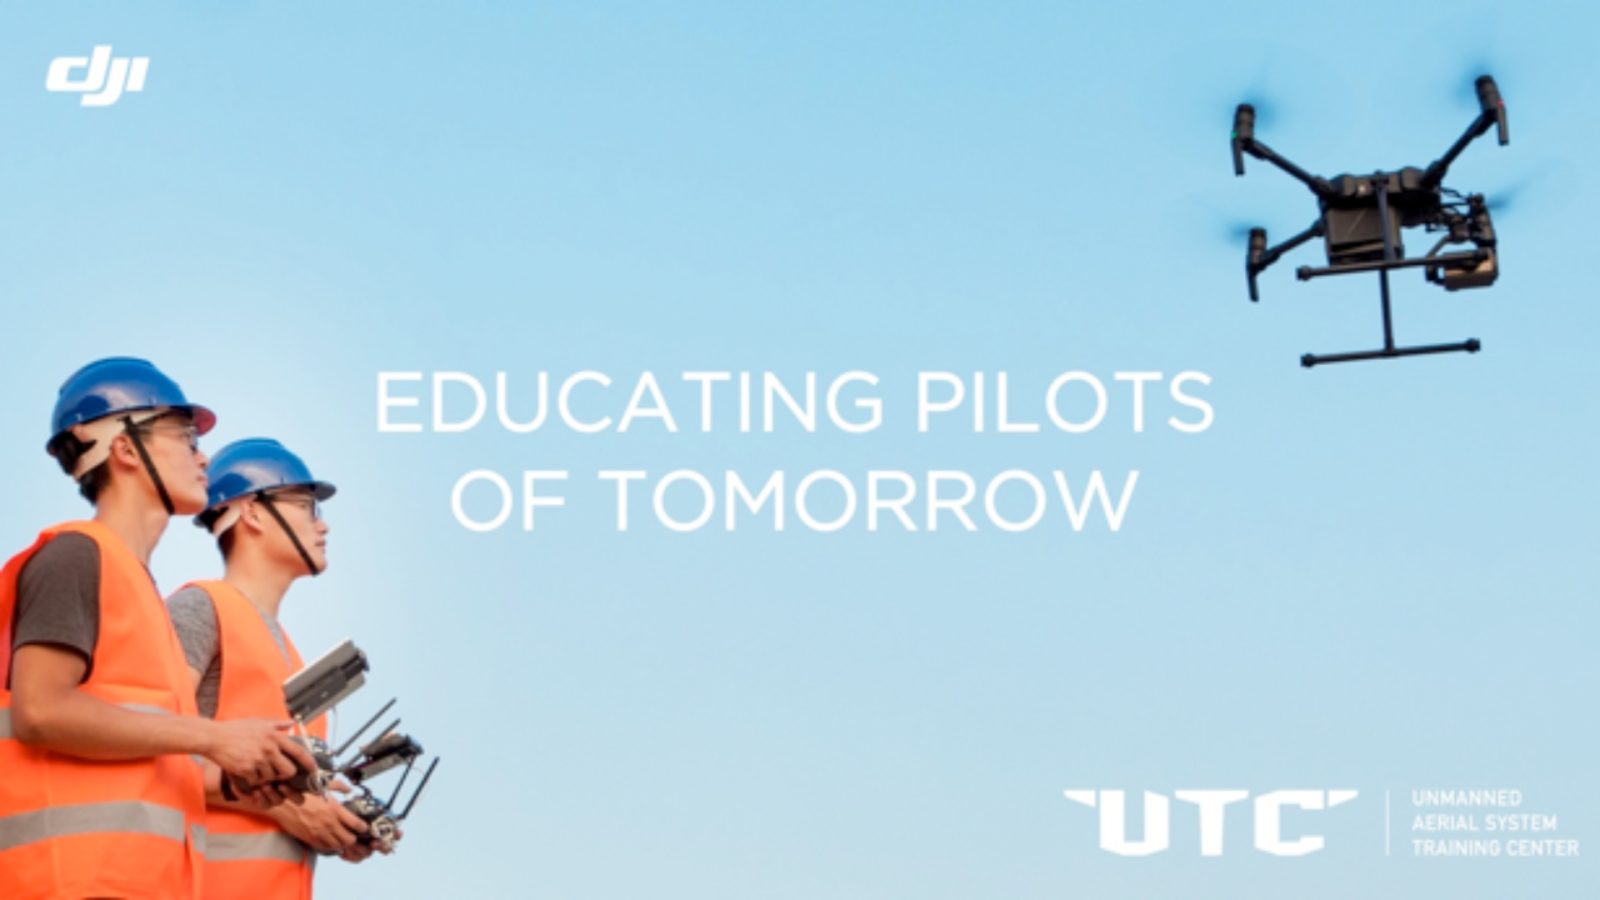 the Unmanned Aerial Systems Training Center (UTC) program. The program will be launched in partnership with Rocky Mountain Unmanned Systems